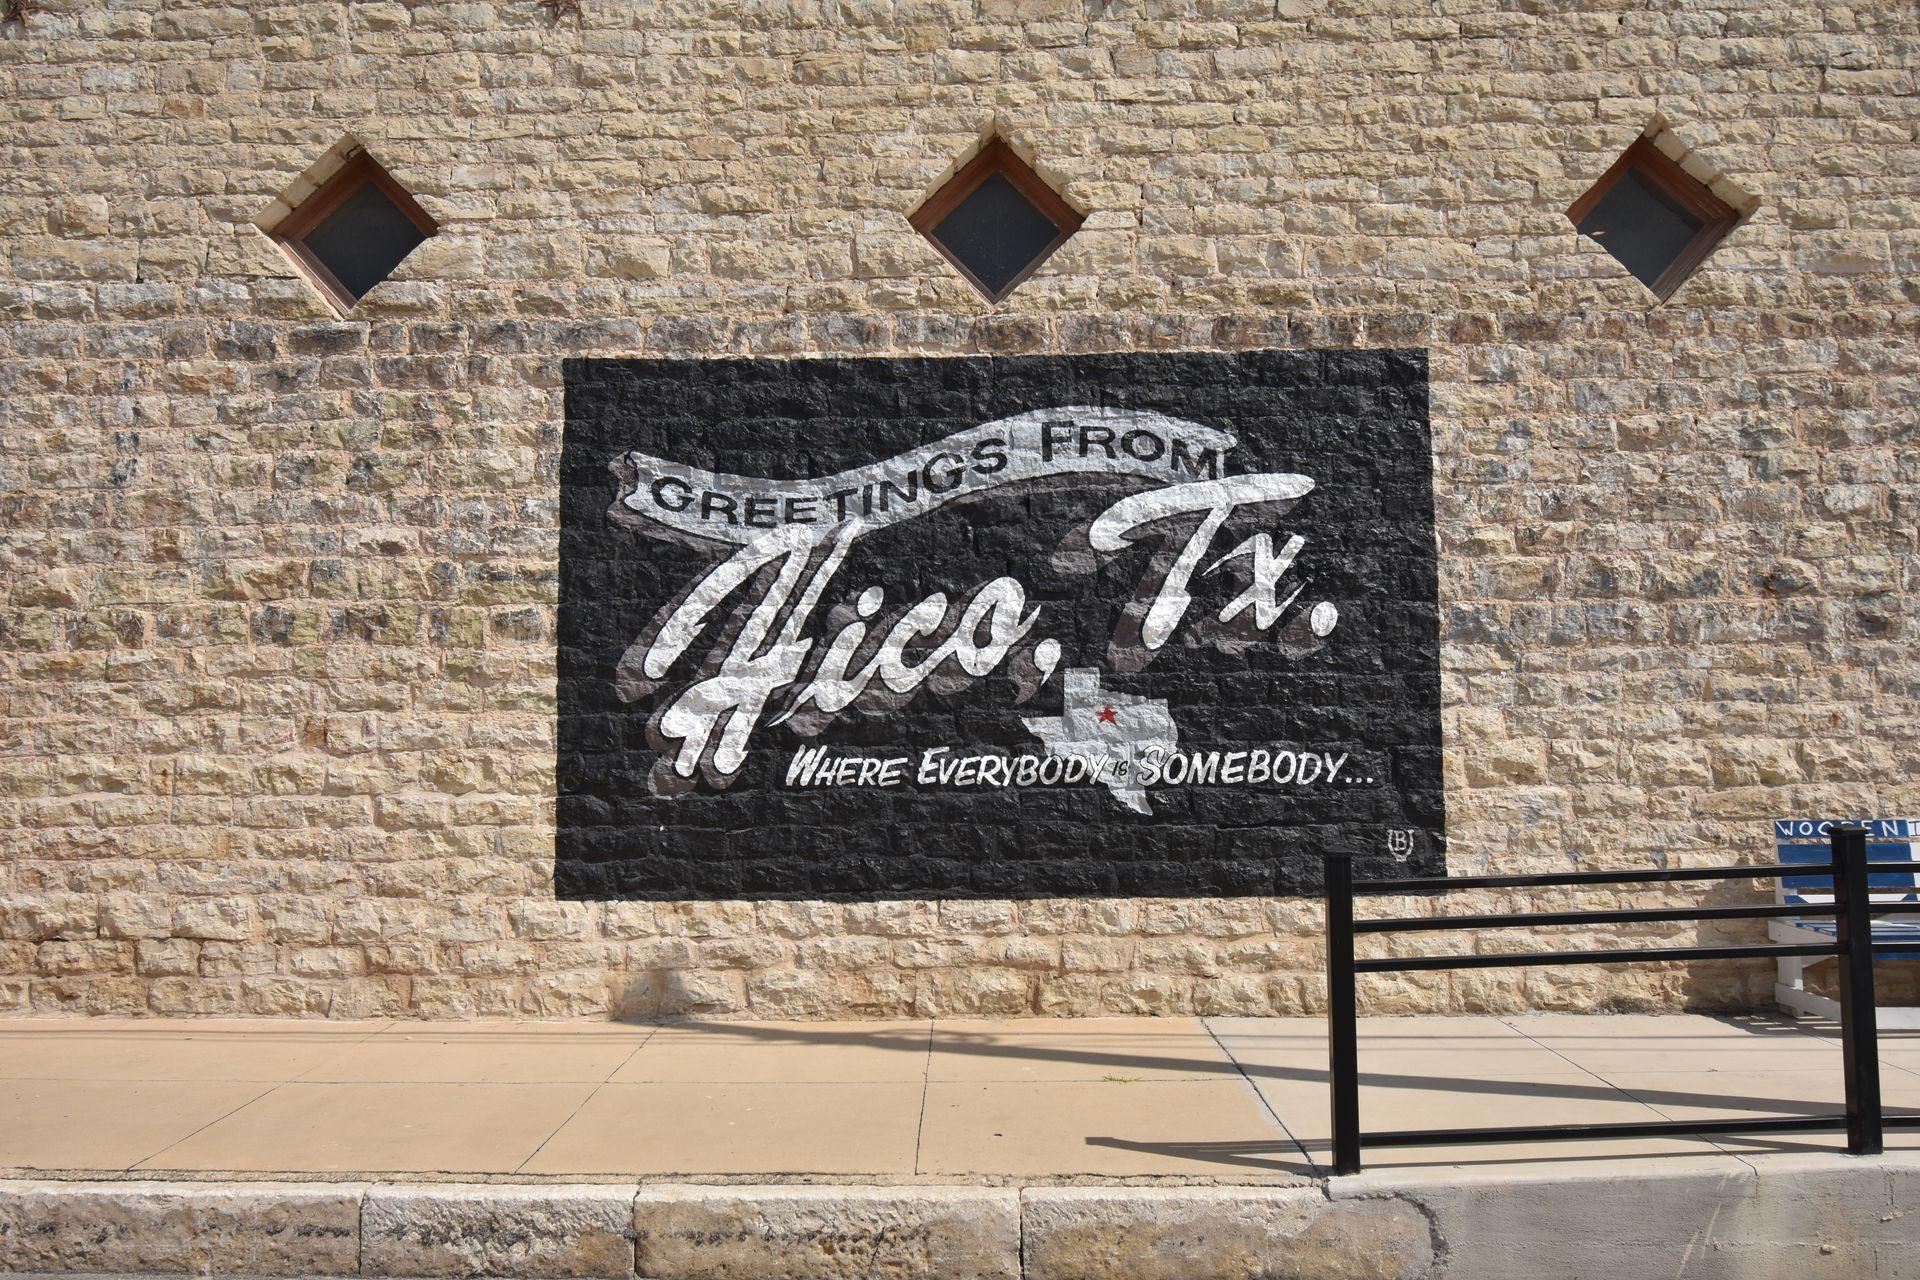 A mural that reads "Greetings from Hico, TX, Where Everybody in Someday"